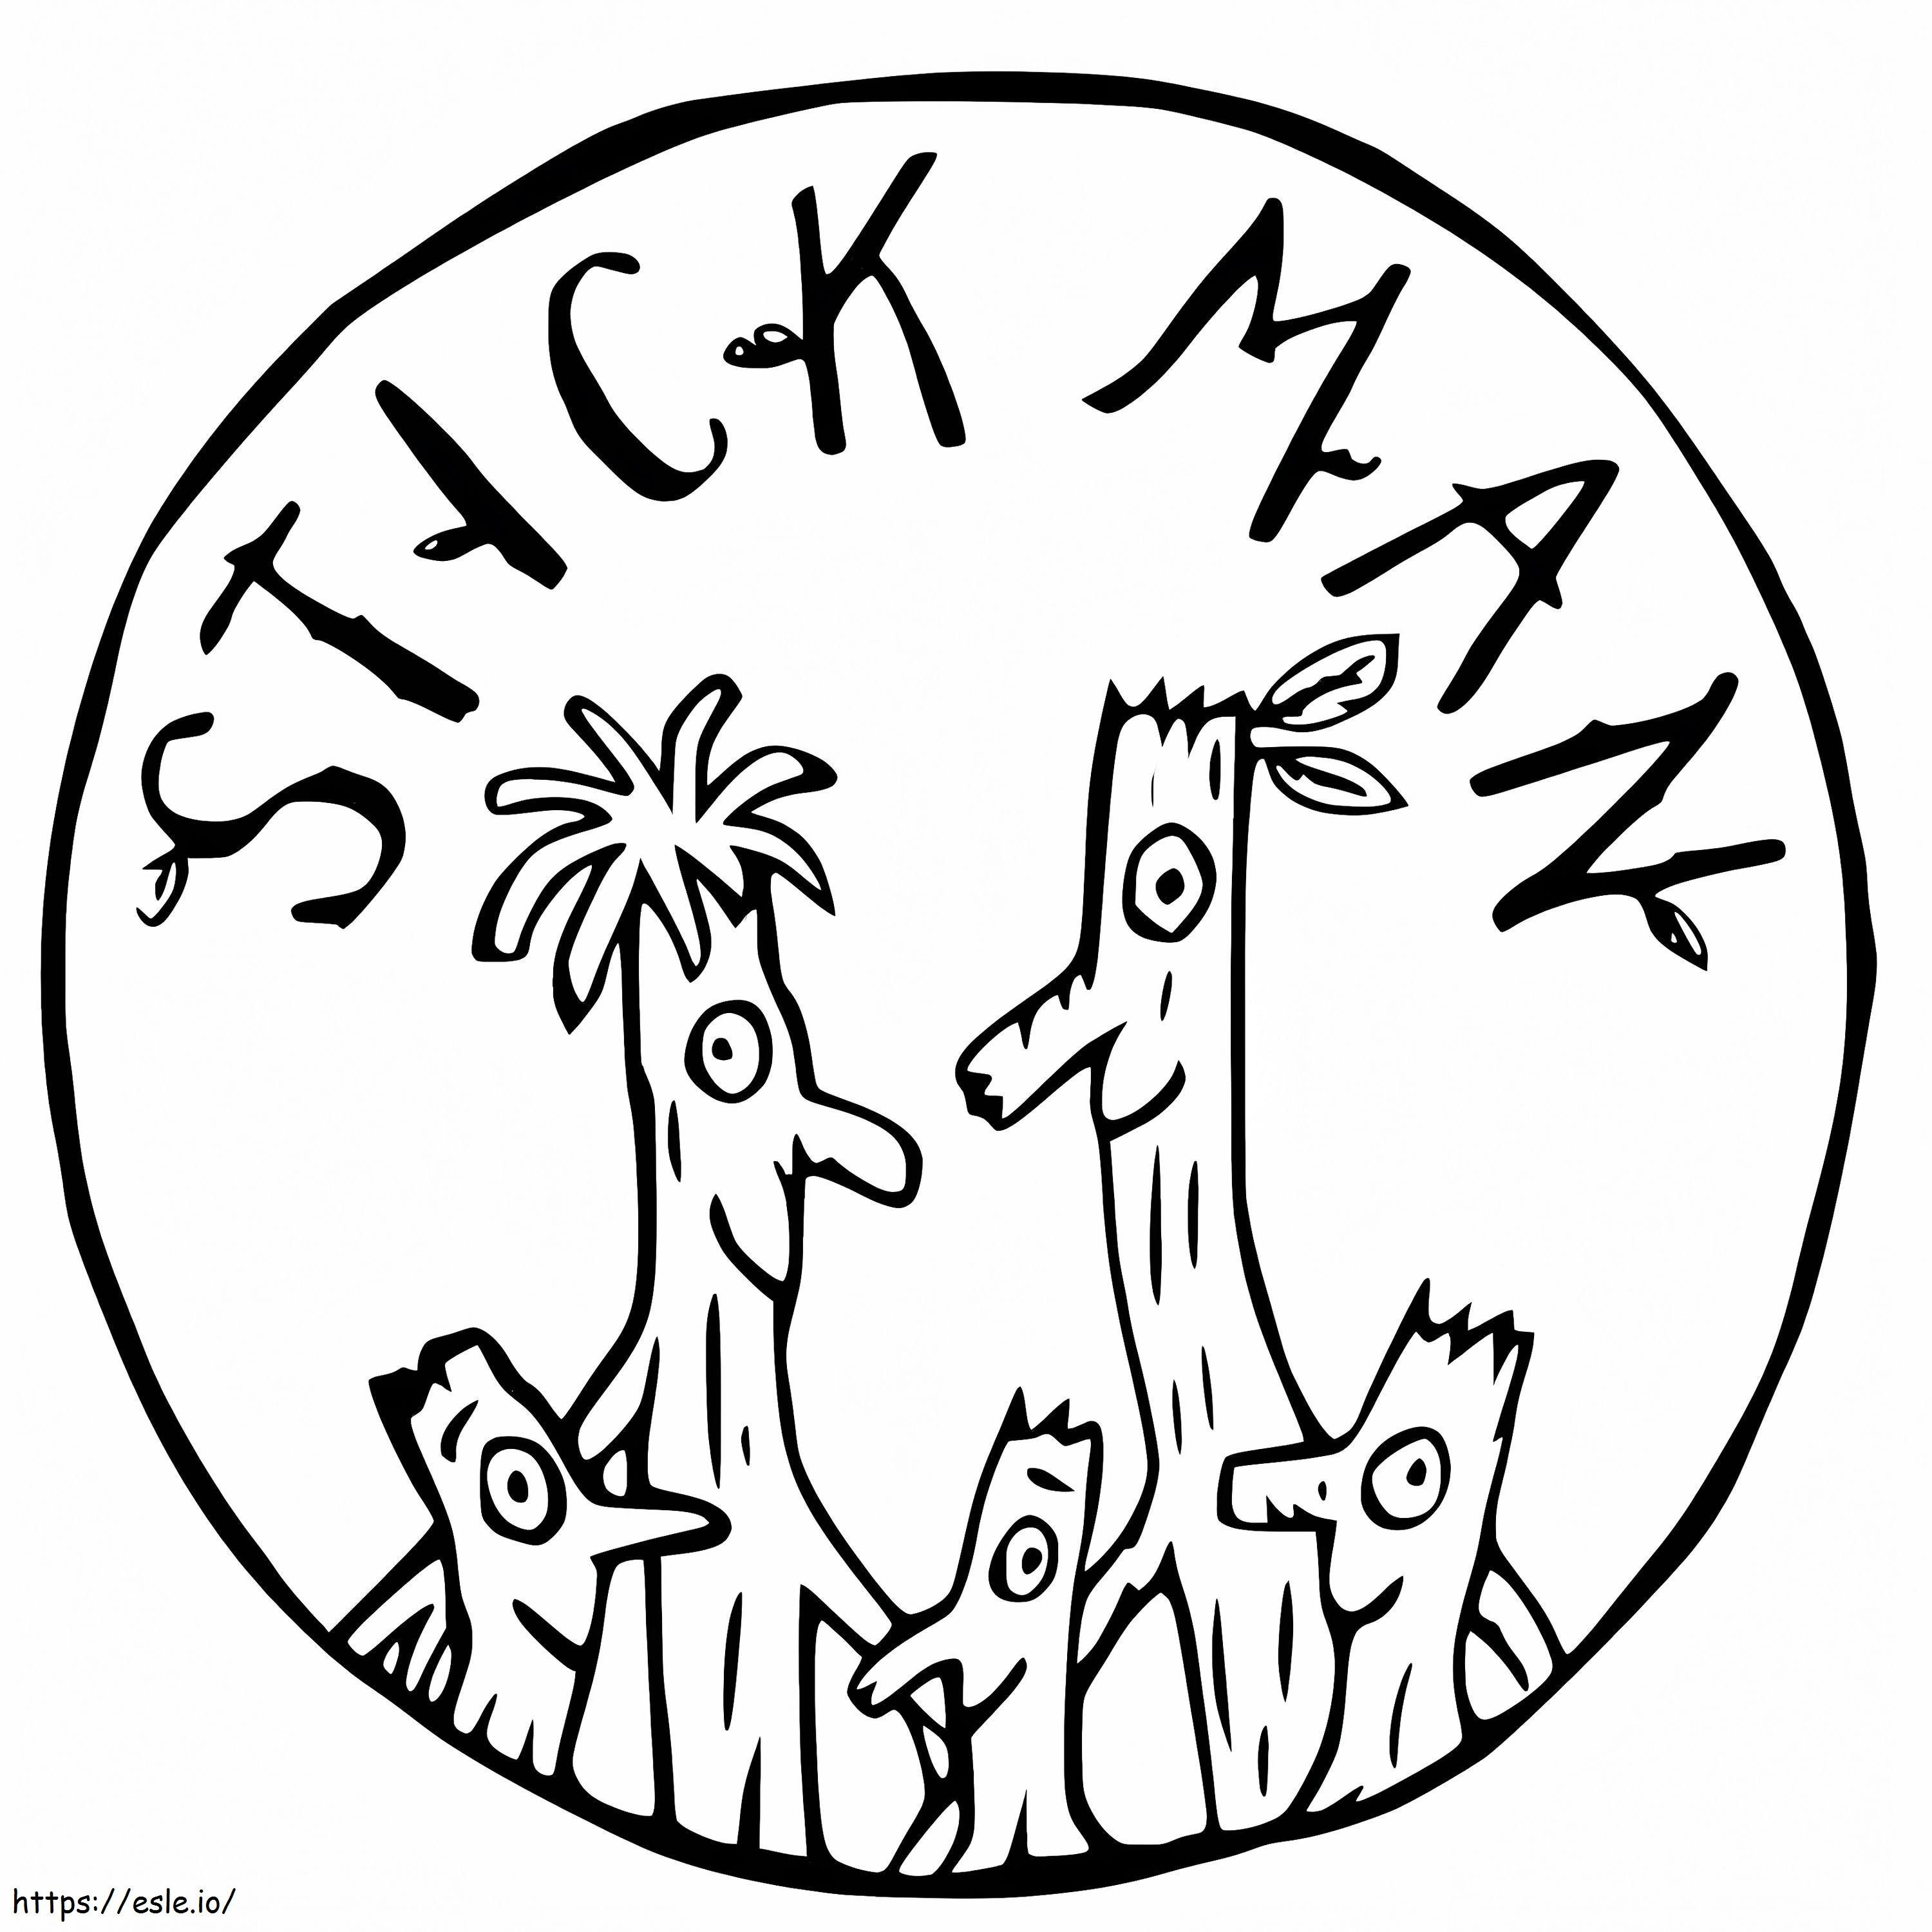 Stick Man Family coloring page